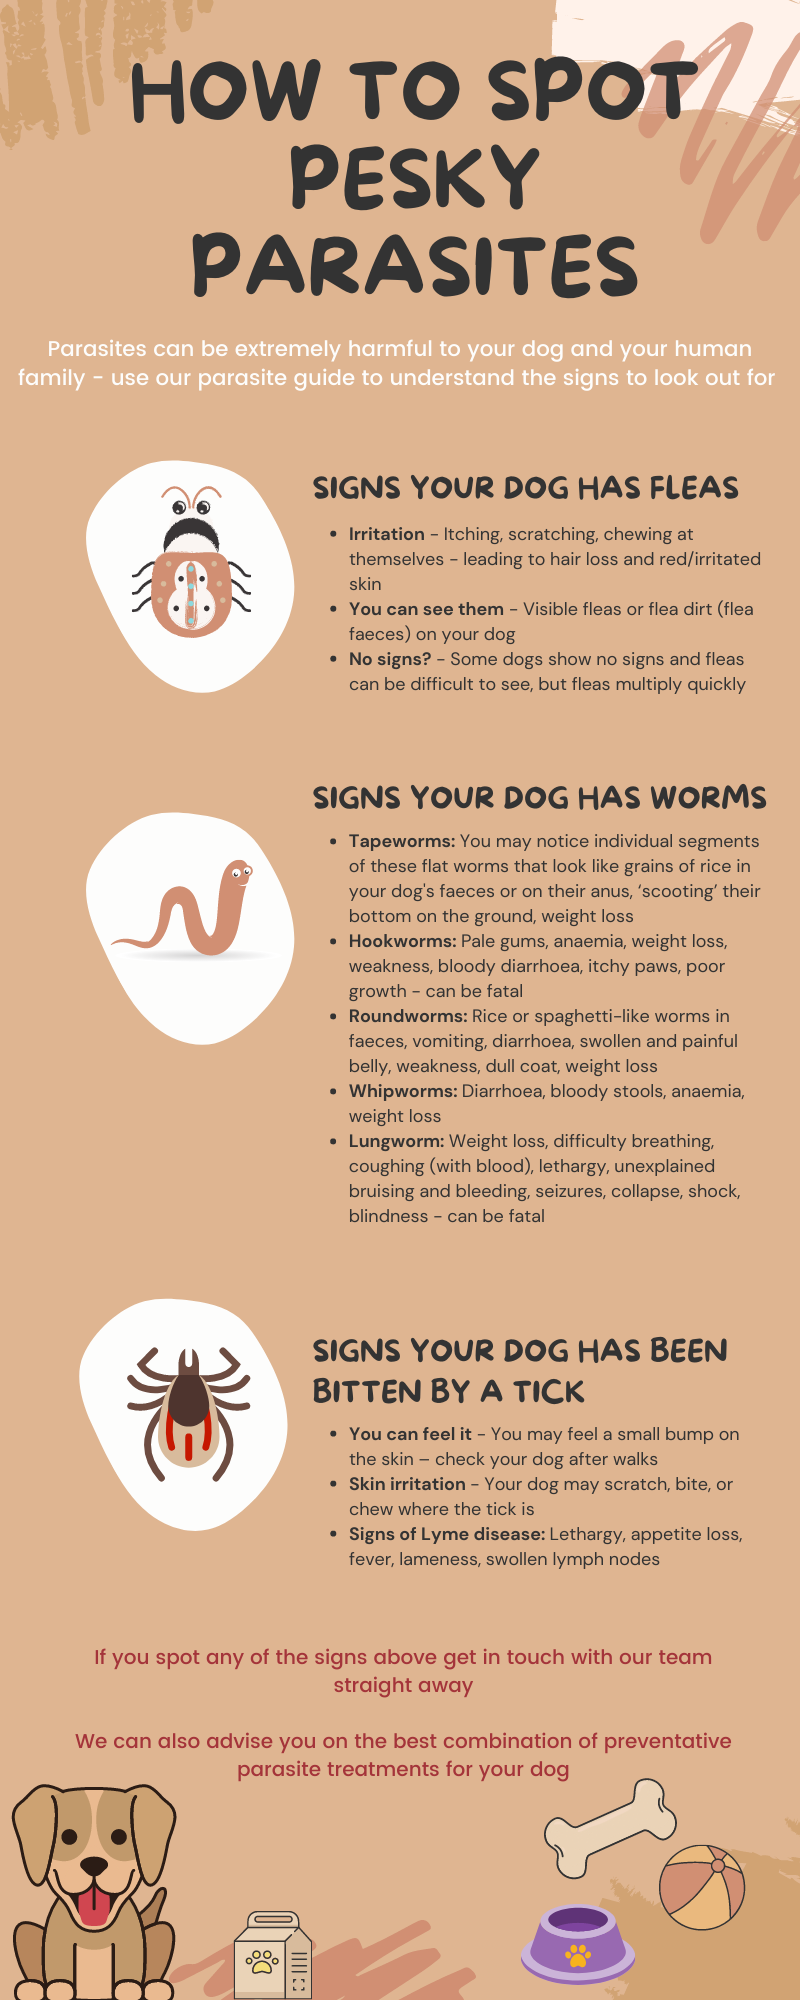 How Do I Know If My Dog Has Parasites? Find Out Now!